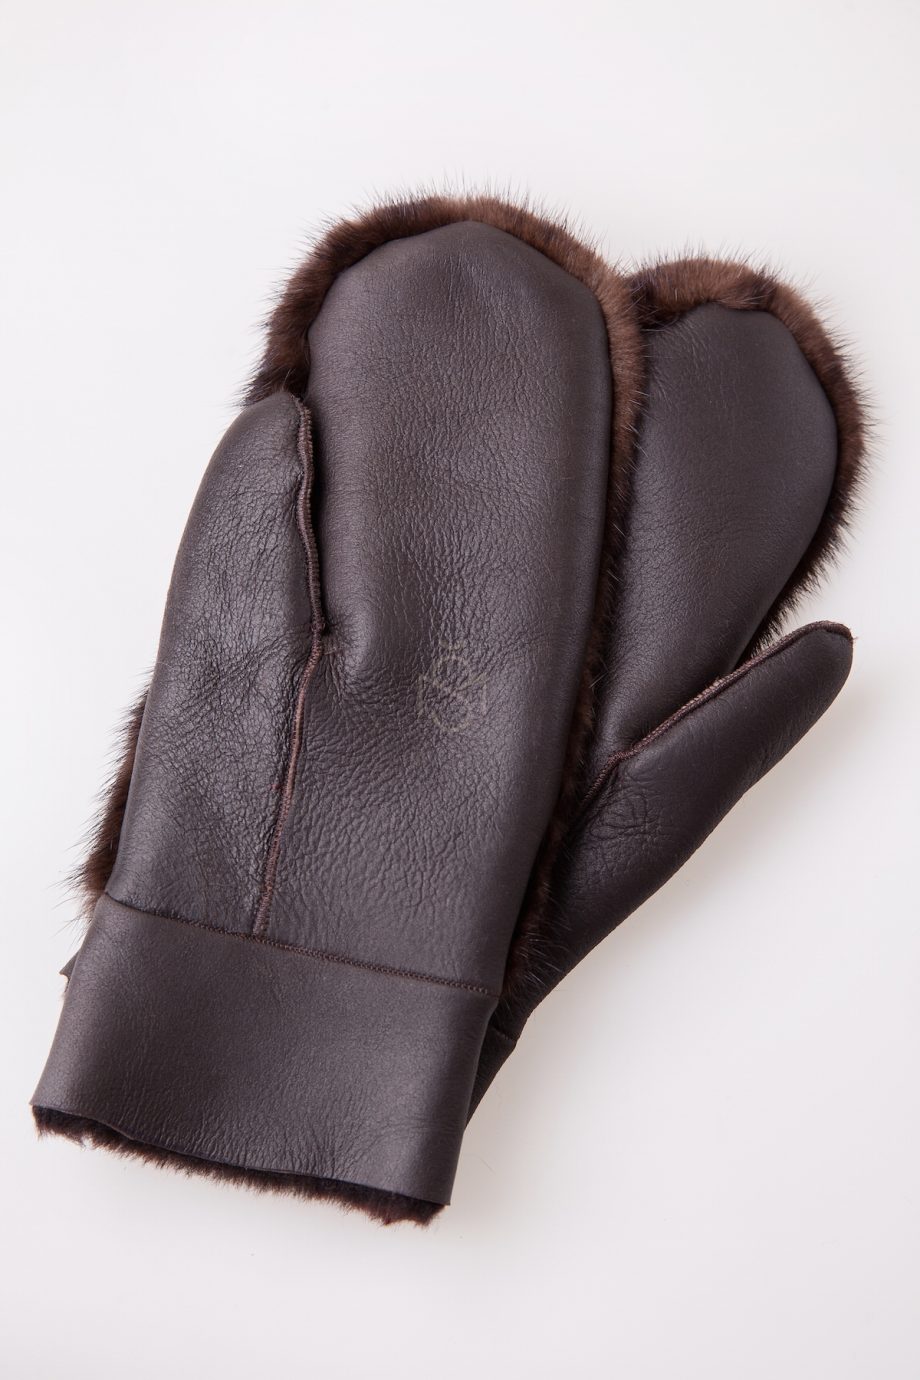 Sheepskin mittens with mink fur, color - natural brown, made by Silta Mada fur studio in Vilnius